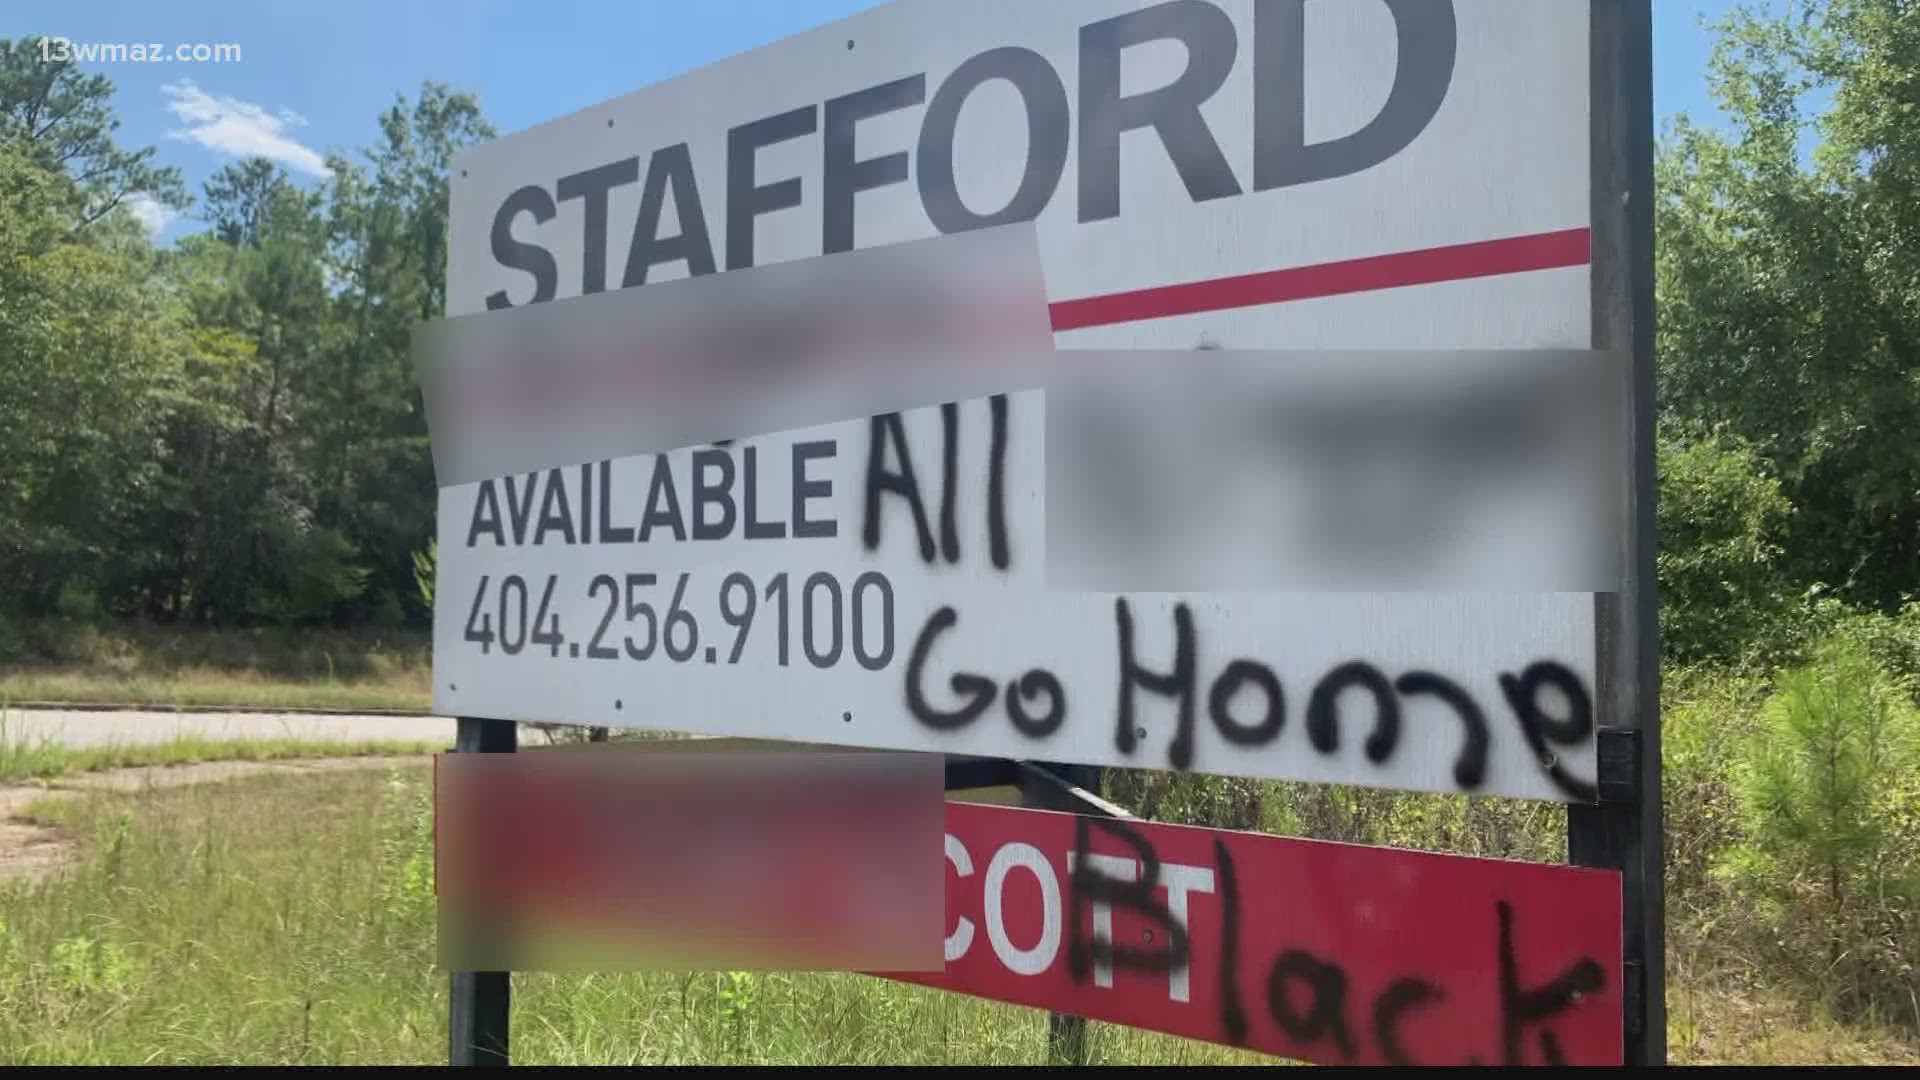 Bibb County investigators are looking for a person who vandalized signs near an African-American business in west Macon over the weekend.